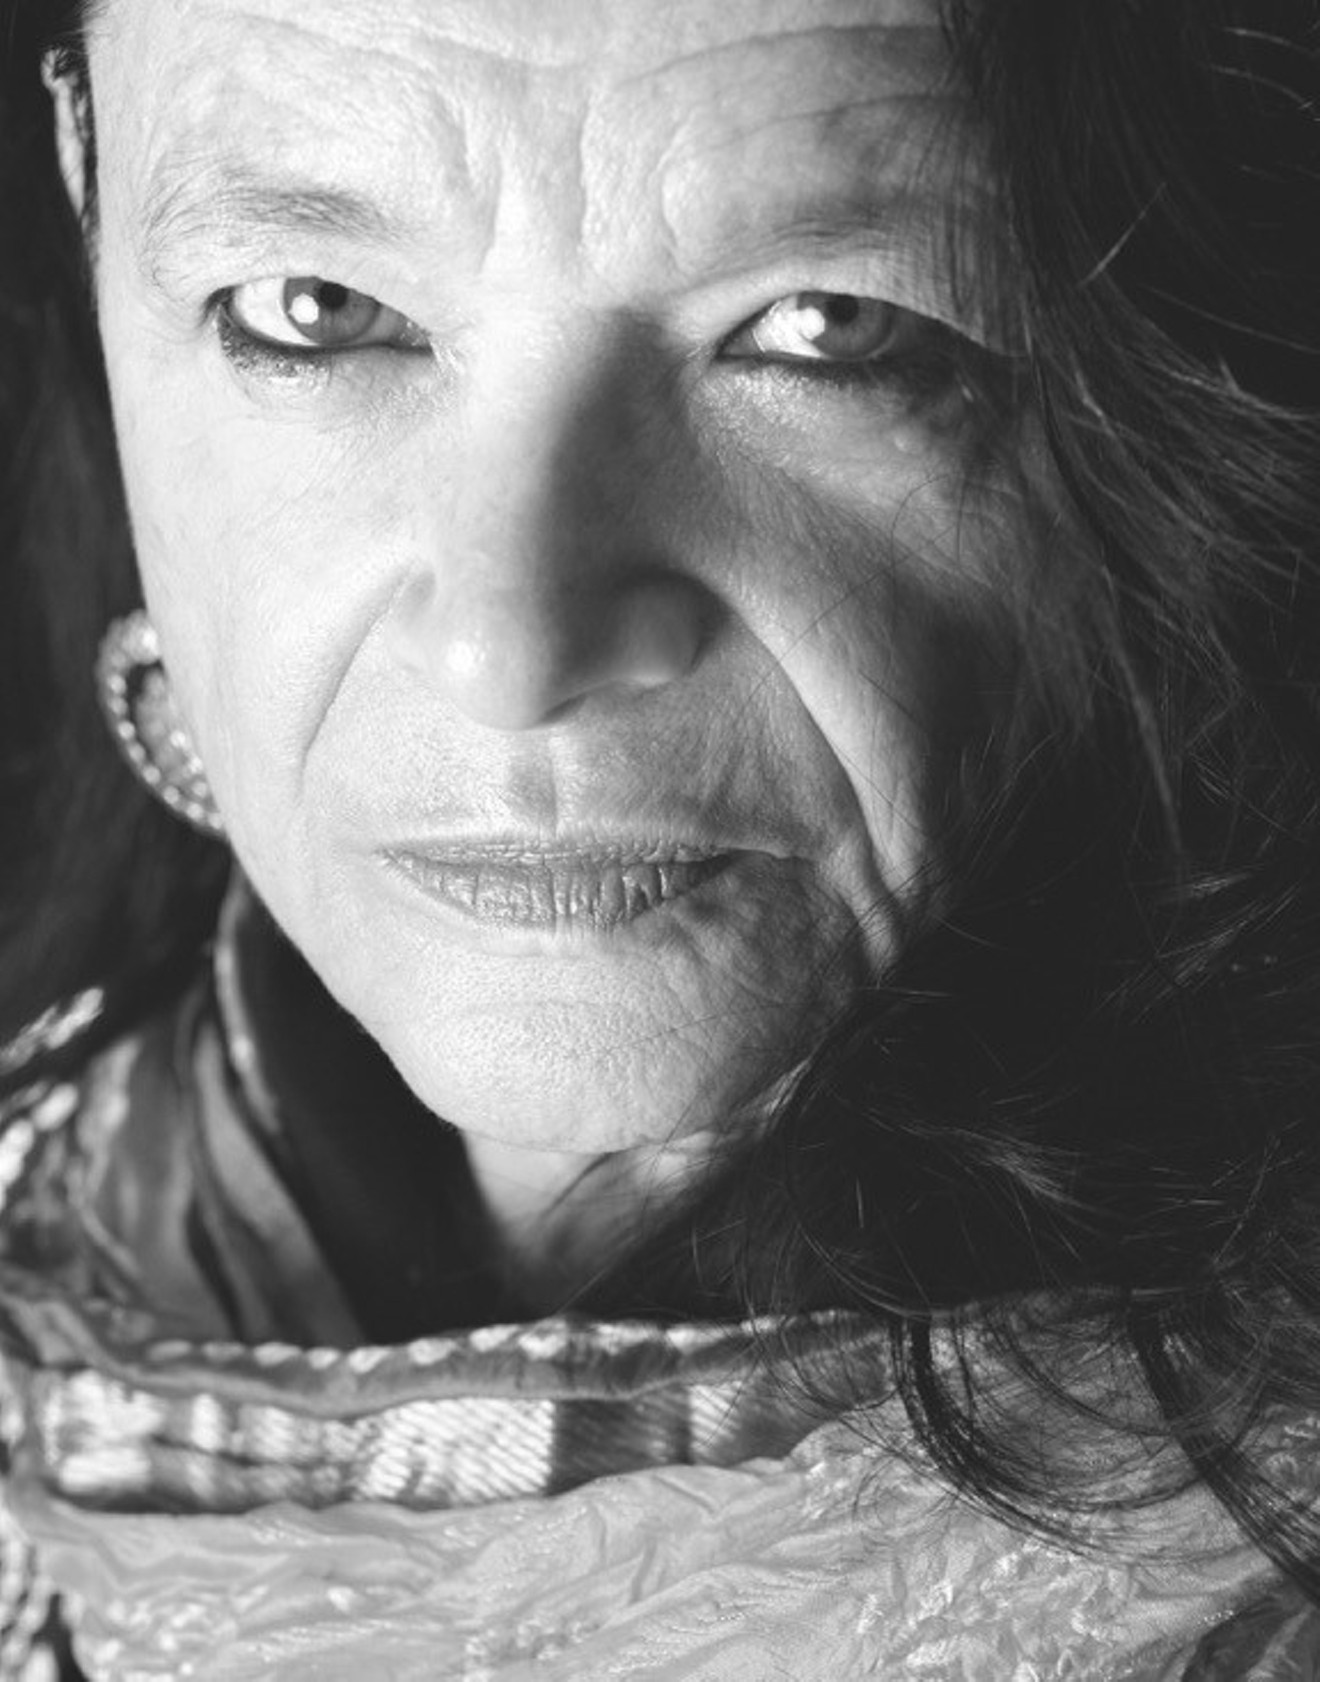 Anne Waldman will read Trickster Feminism at Innisfree Poetry Bookstore on Tuesday, August 28.